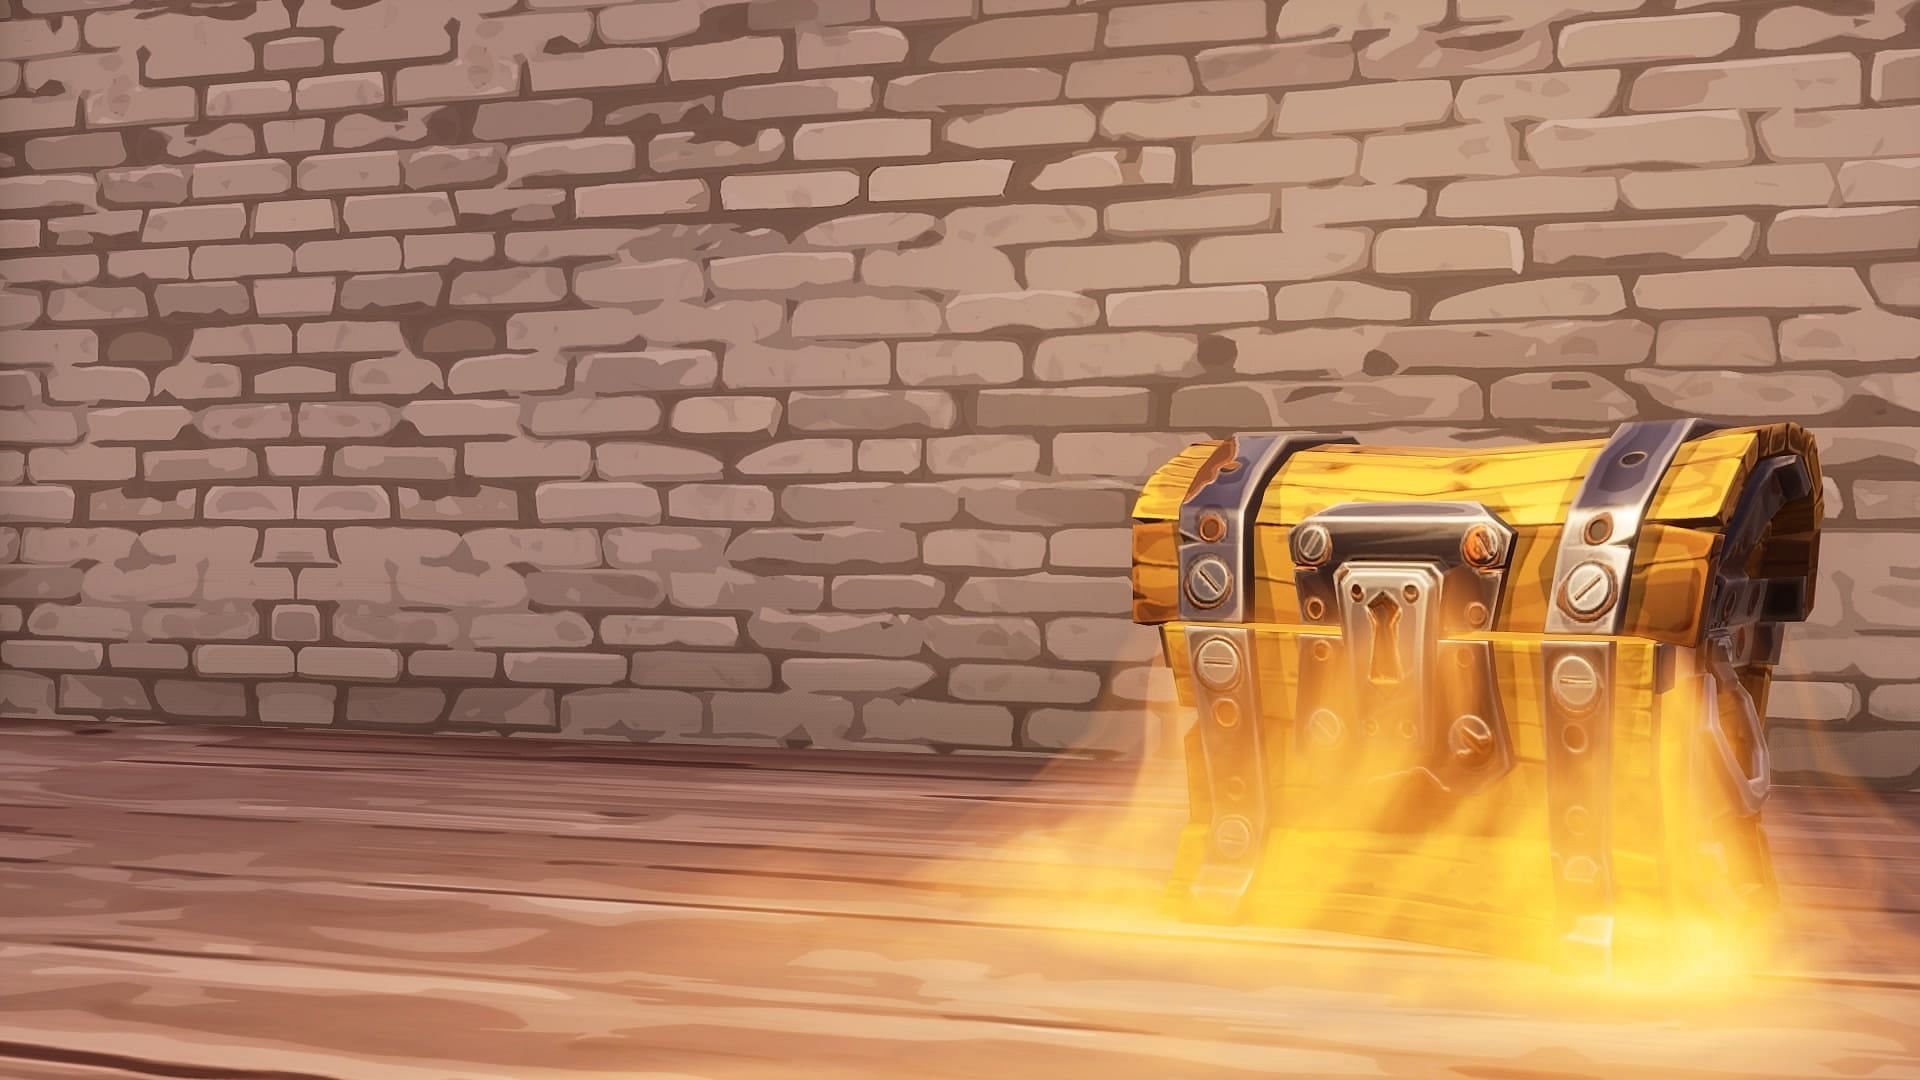 Supercharged XP in Fortnite is essential for leveling up the Battle Pass (Image via Epic Games)